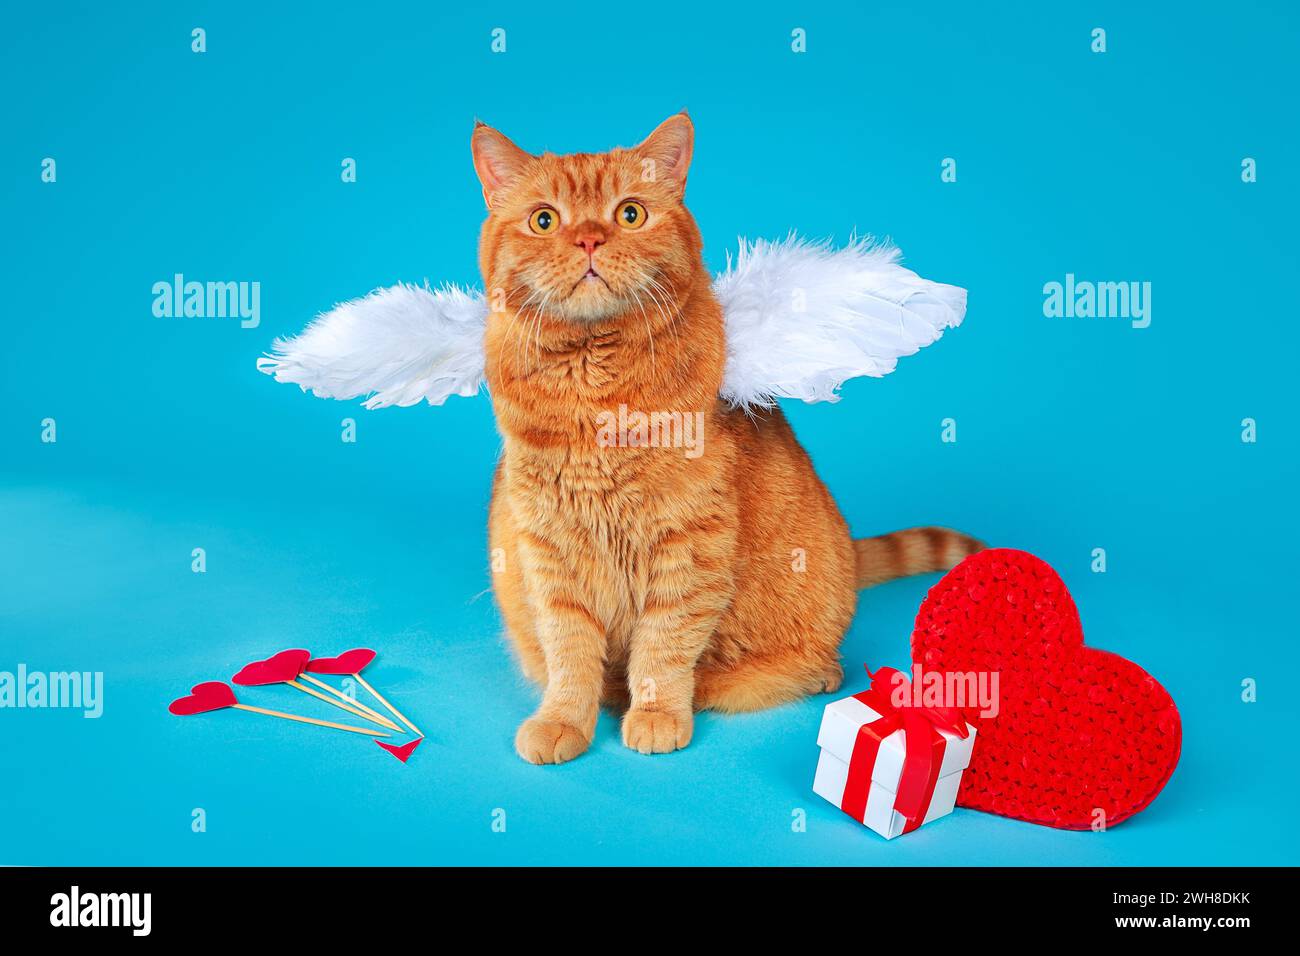 Valentines Day Cupid. Portrait of ginger british cat with angel white wings on blue background. Stock Photo